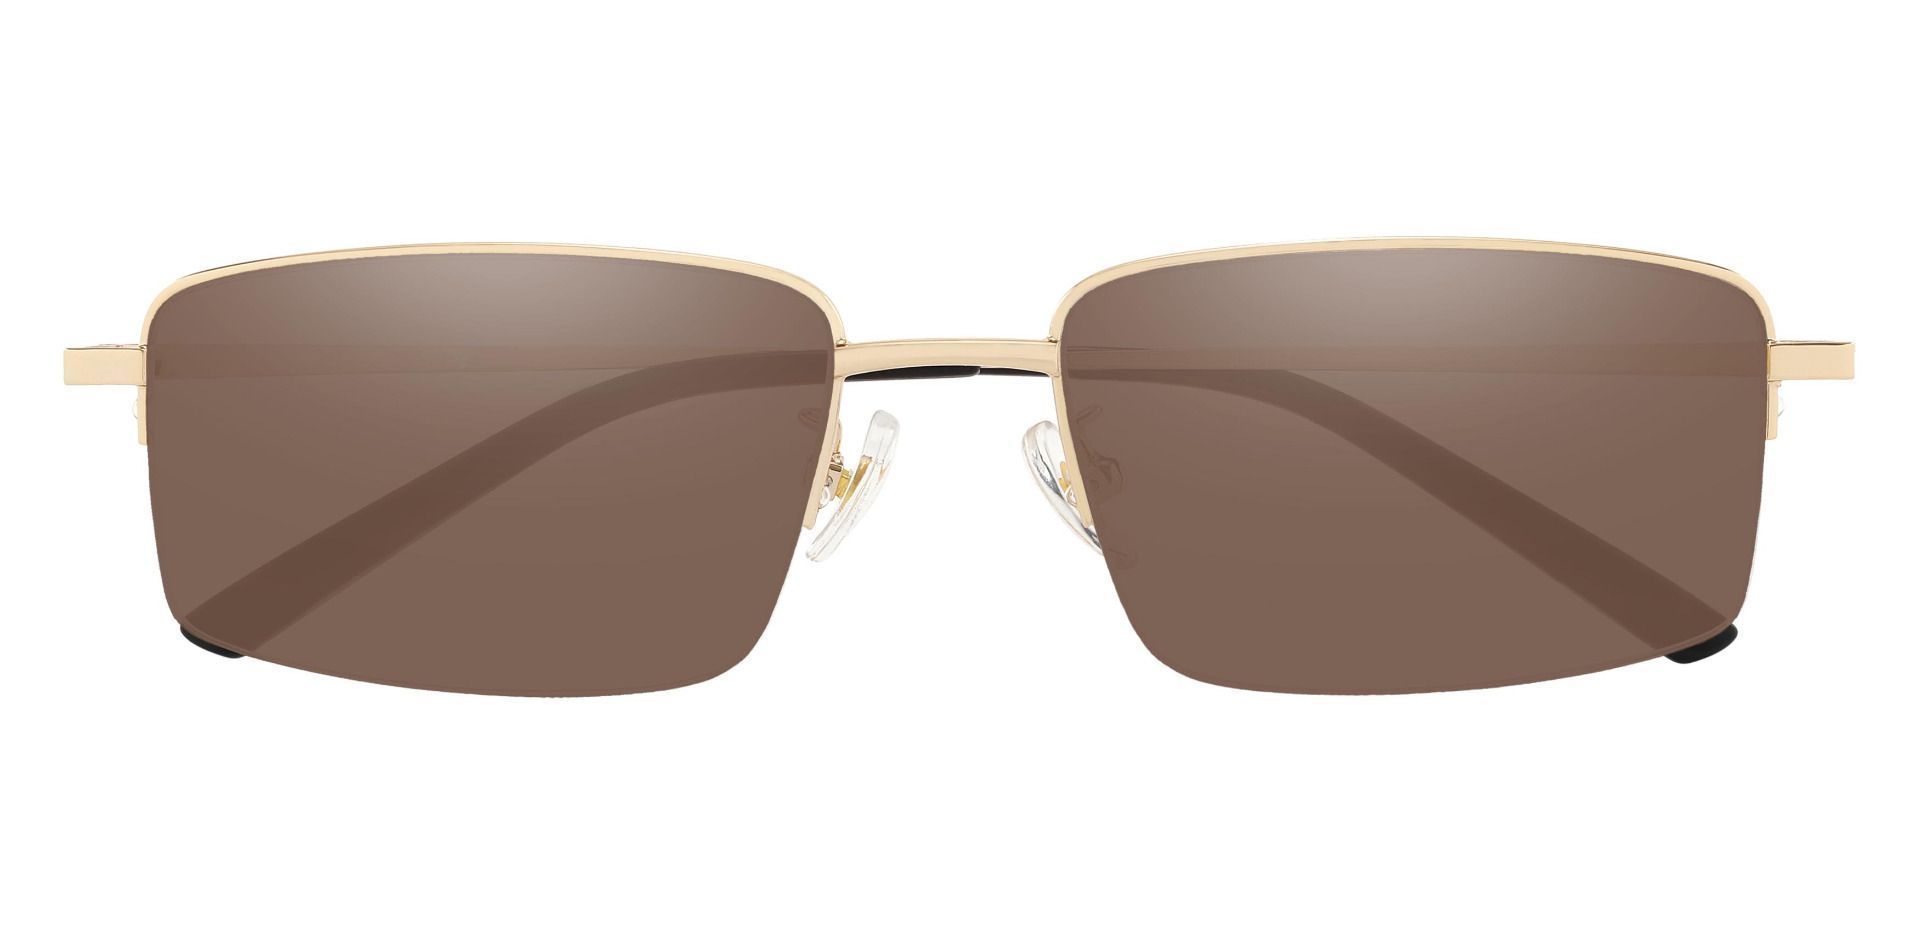 Wayne Rectangle Reading Sunglasses - Gold Frame With Brown Lenses